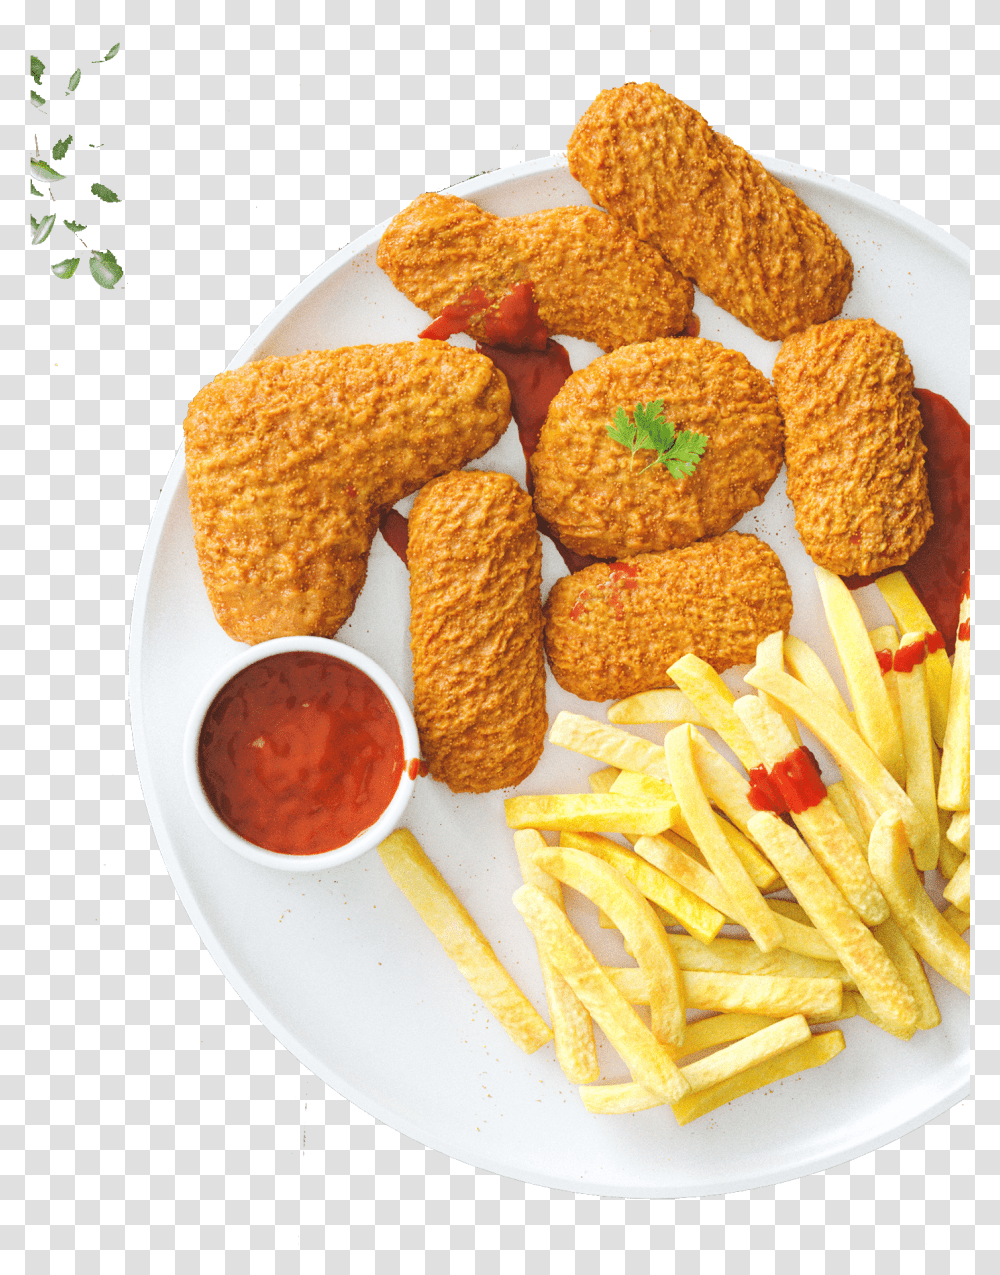 Clip Art Nugget Hamburger Fried Ketchup French Fries And Nuggets, Fried Chicken, Food, Dish, Meal Transparent Png